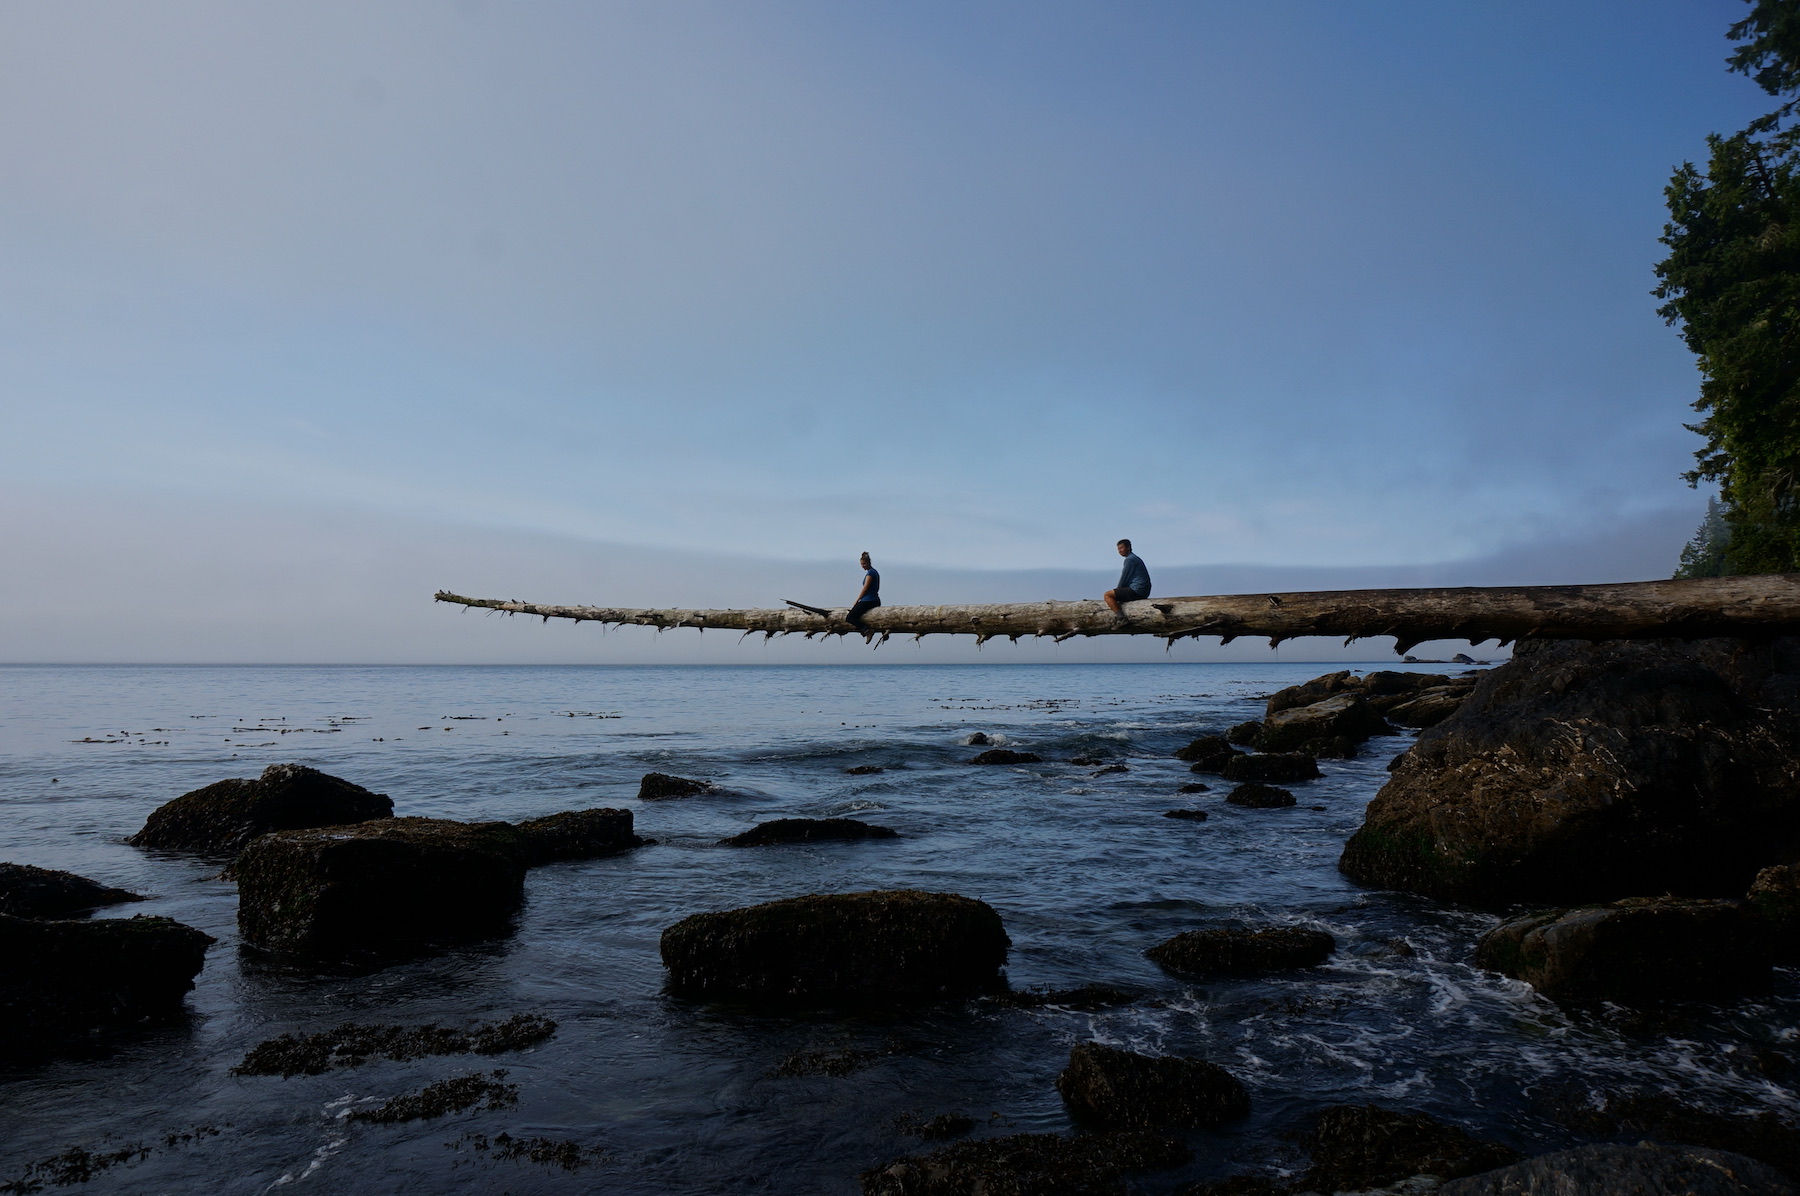 two people going out on a limb above the ocean (sitting on a driftwood log positioned over the water)